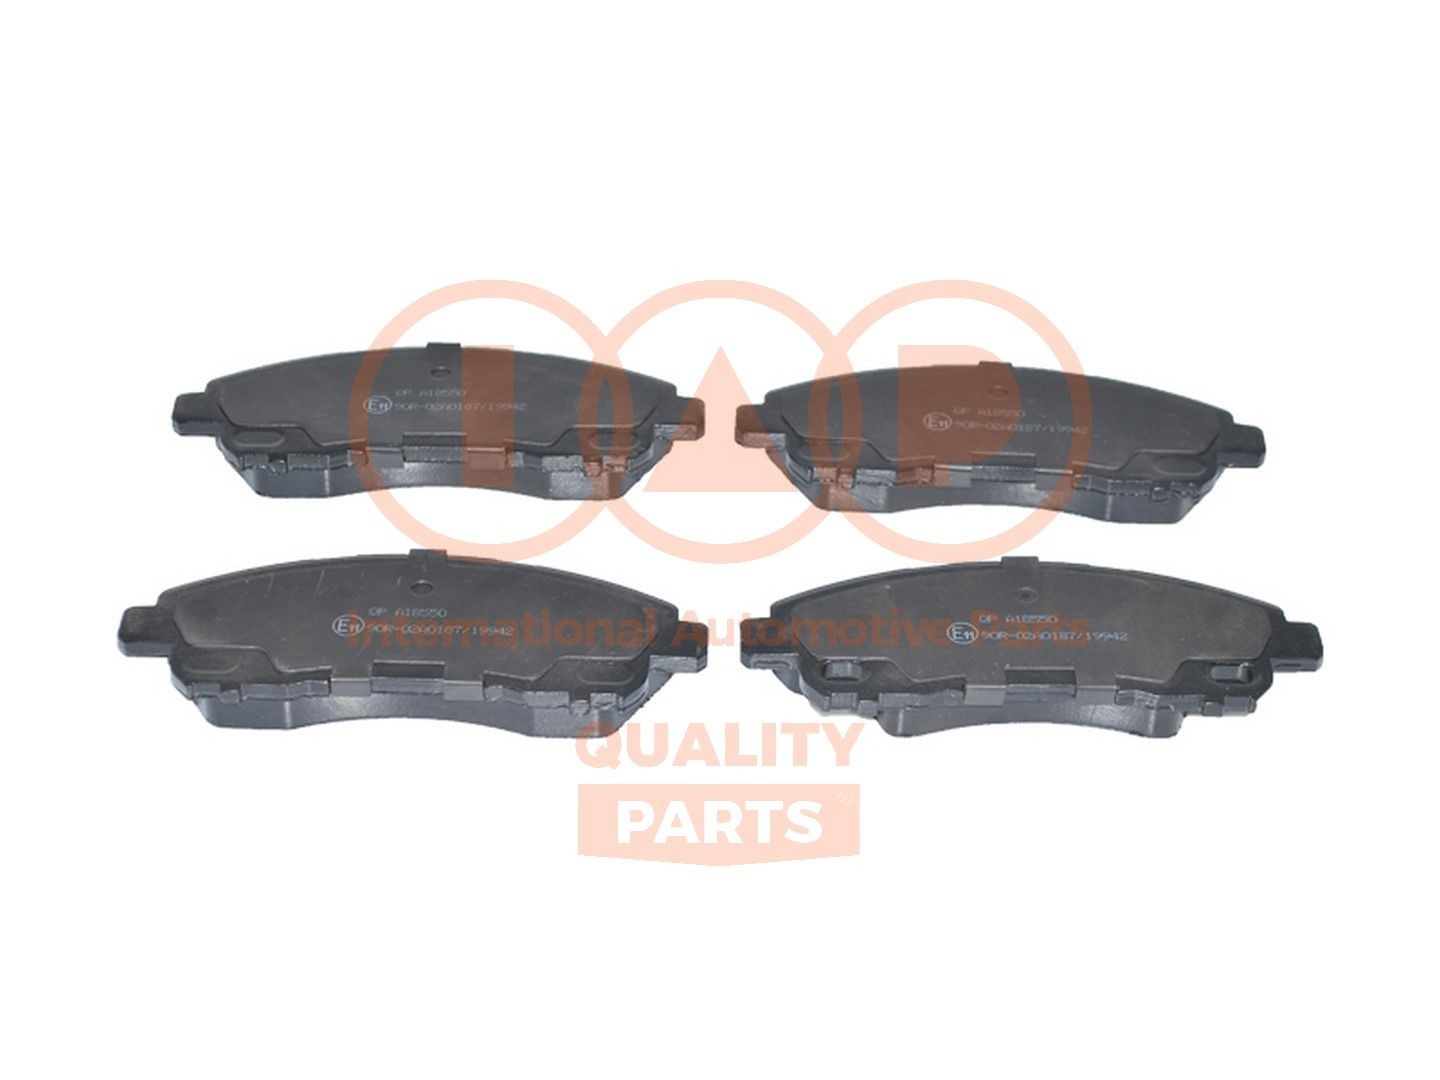 IAP QUALITY PARTS Rear Axle Height 1: 57,9mm, Width 1: 153,5mm, Thickness 1: 17,7mm Brake pads 704-12107 buy